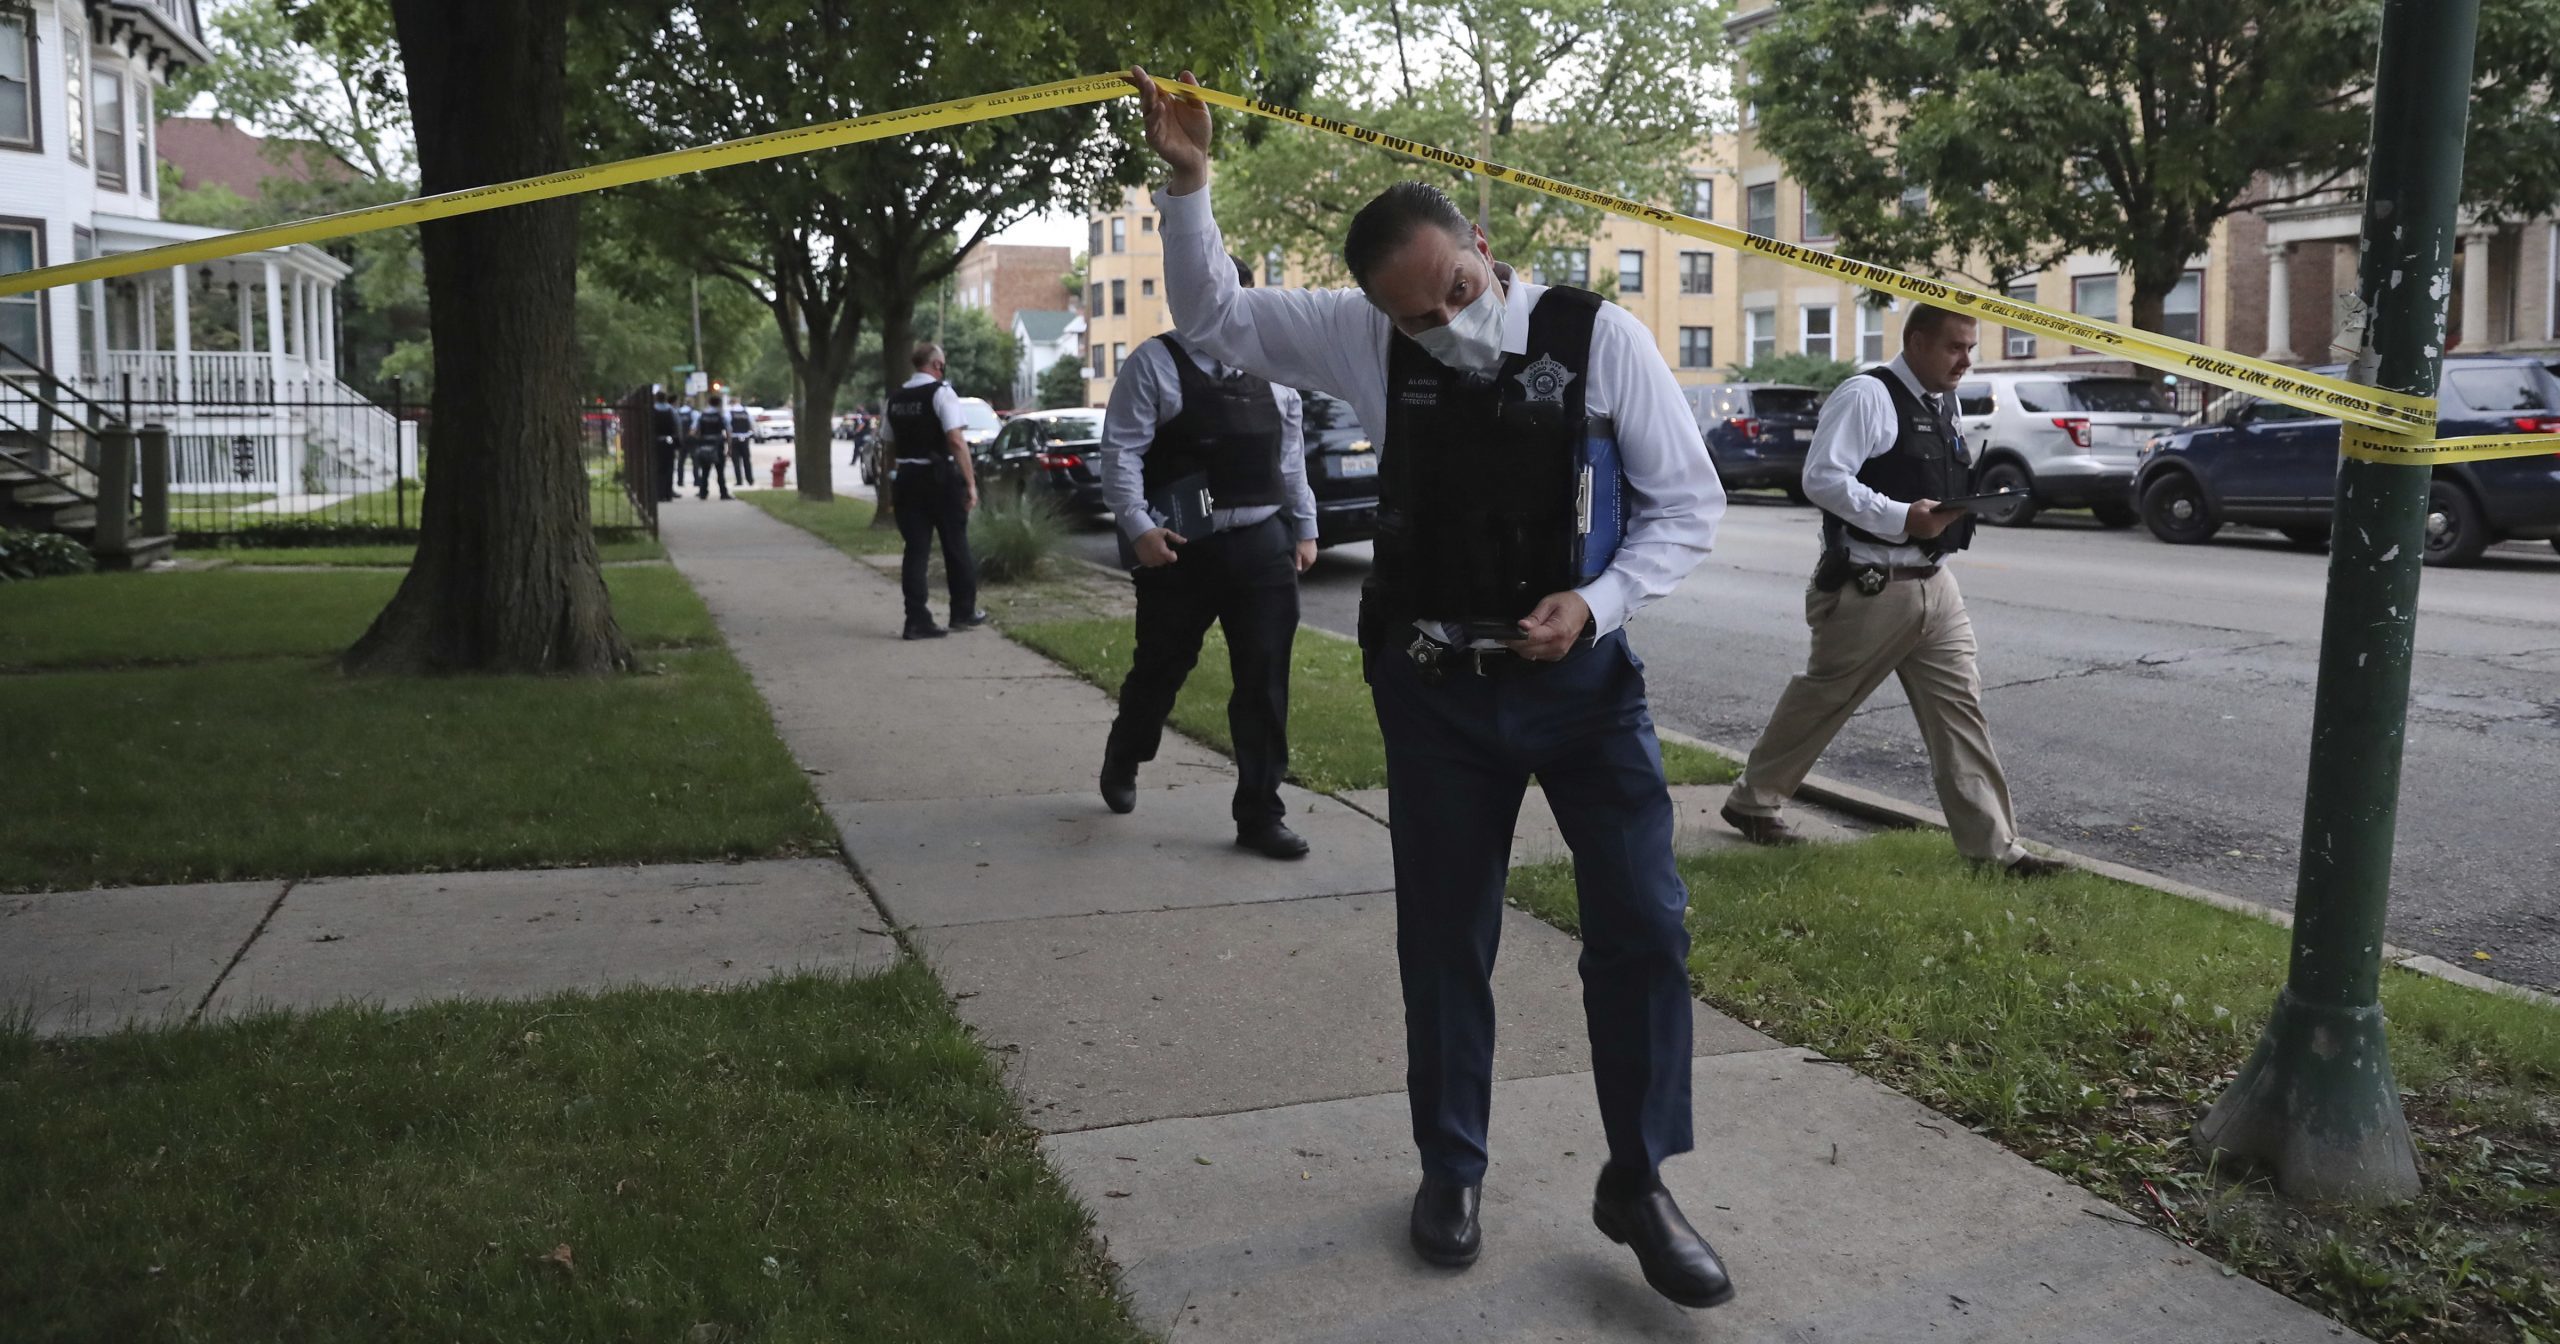 Police detectives canvas the area where a 3-year-old boy was fatally shot while riding in an SUV with his father on June 20, 2020, in Chicago. More than 100 people were shot in a wave of gunfire in Chicago over the Father’s Day weekend that produced the city’s highest number of shooting victims in a single weekend this year.